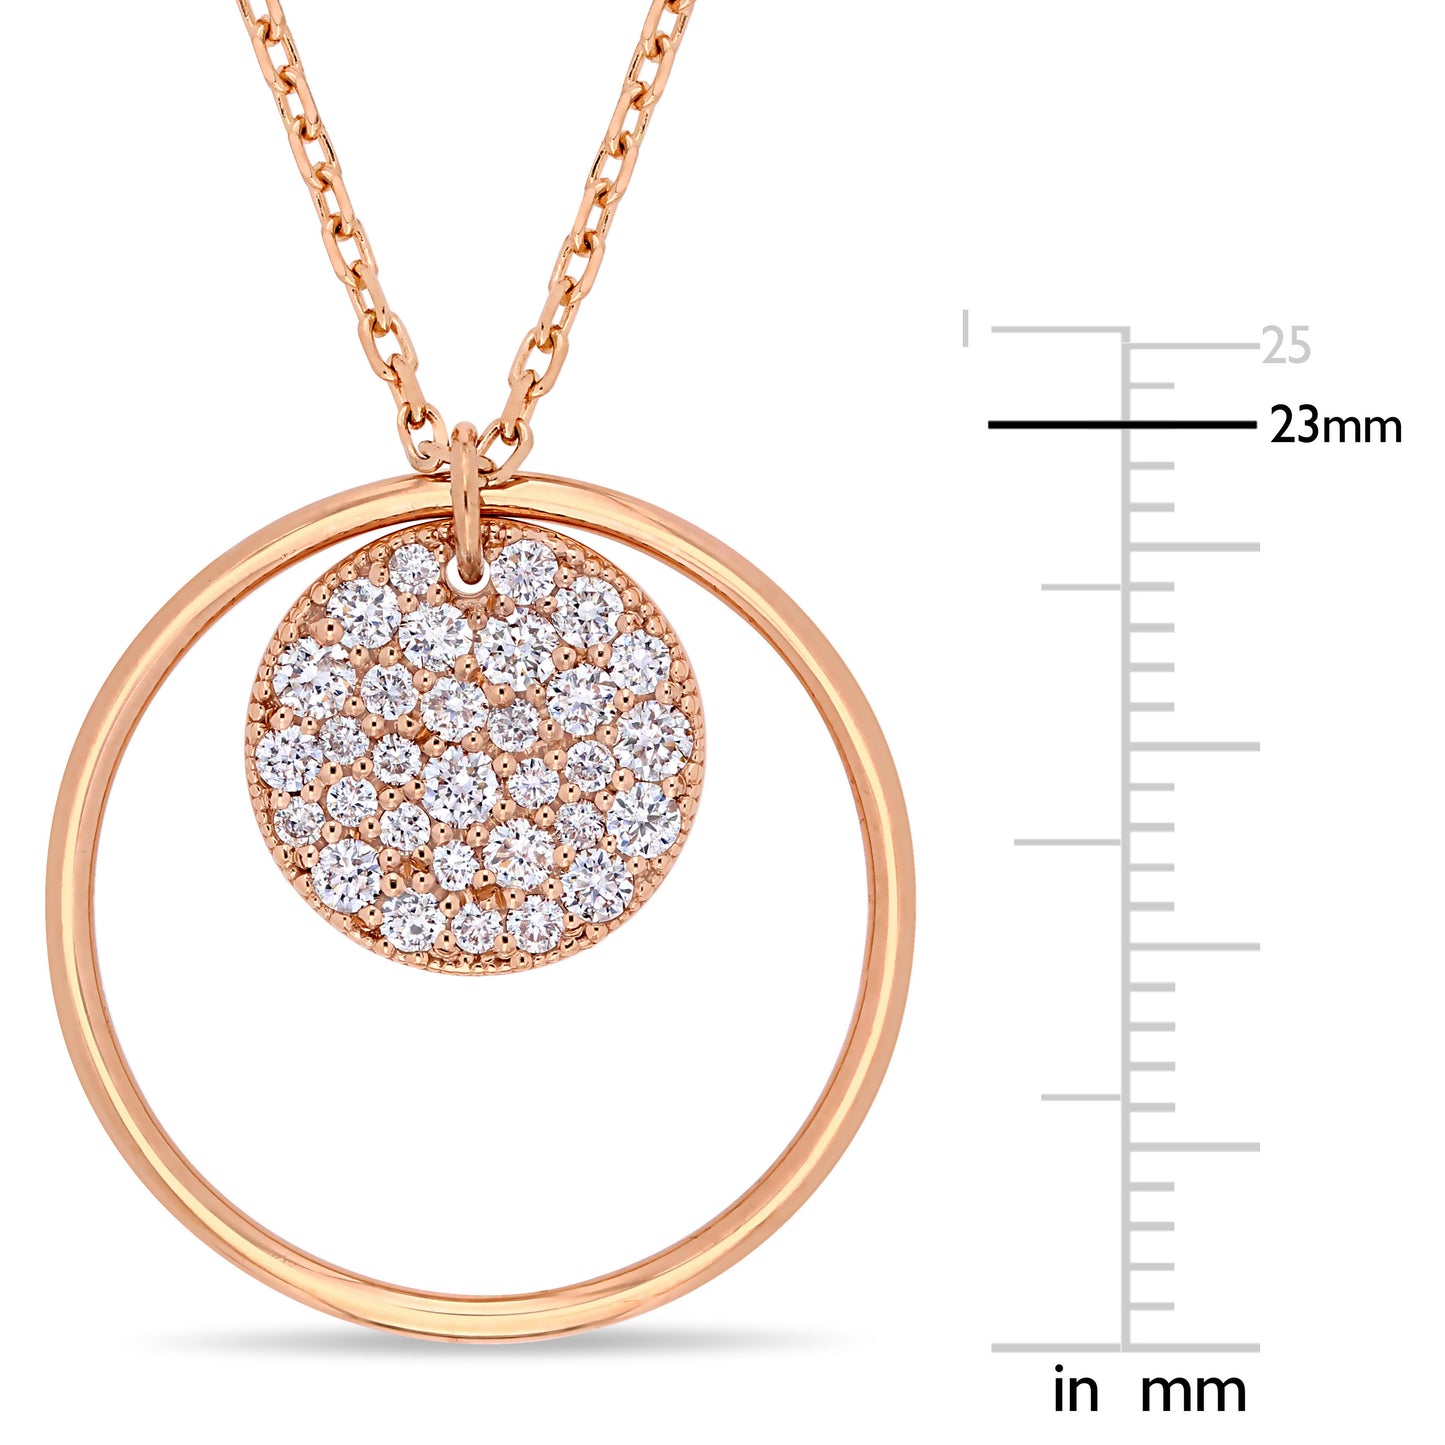 Circle Of Life Diamond Necklace in 14k Rose Gold